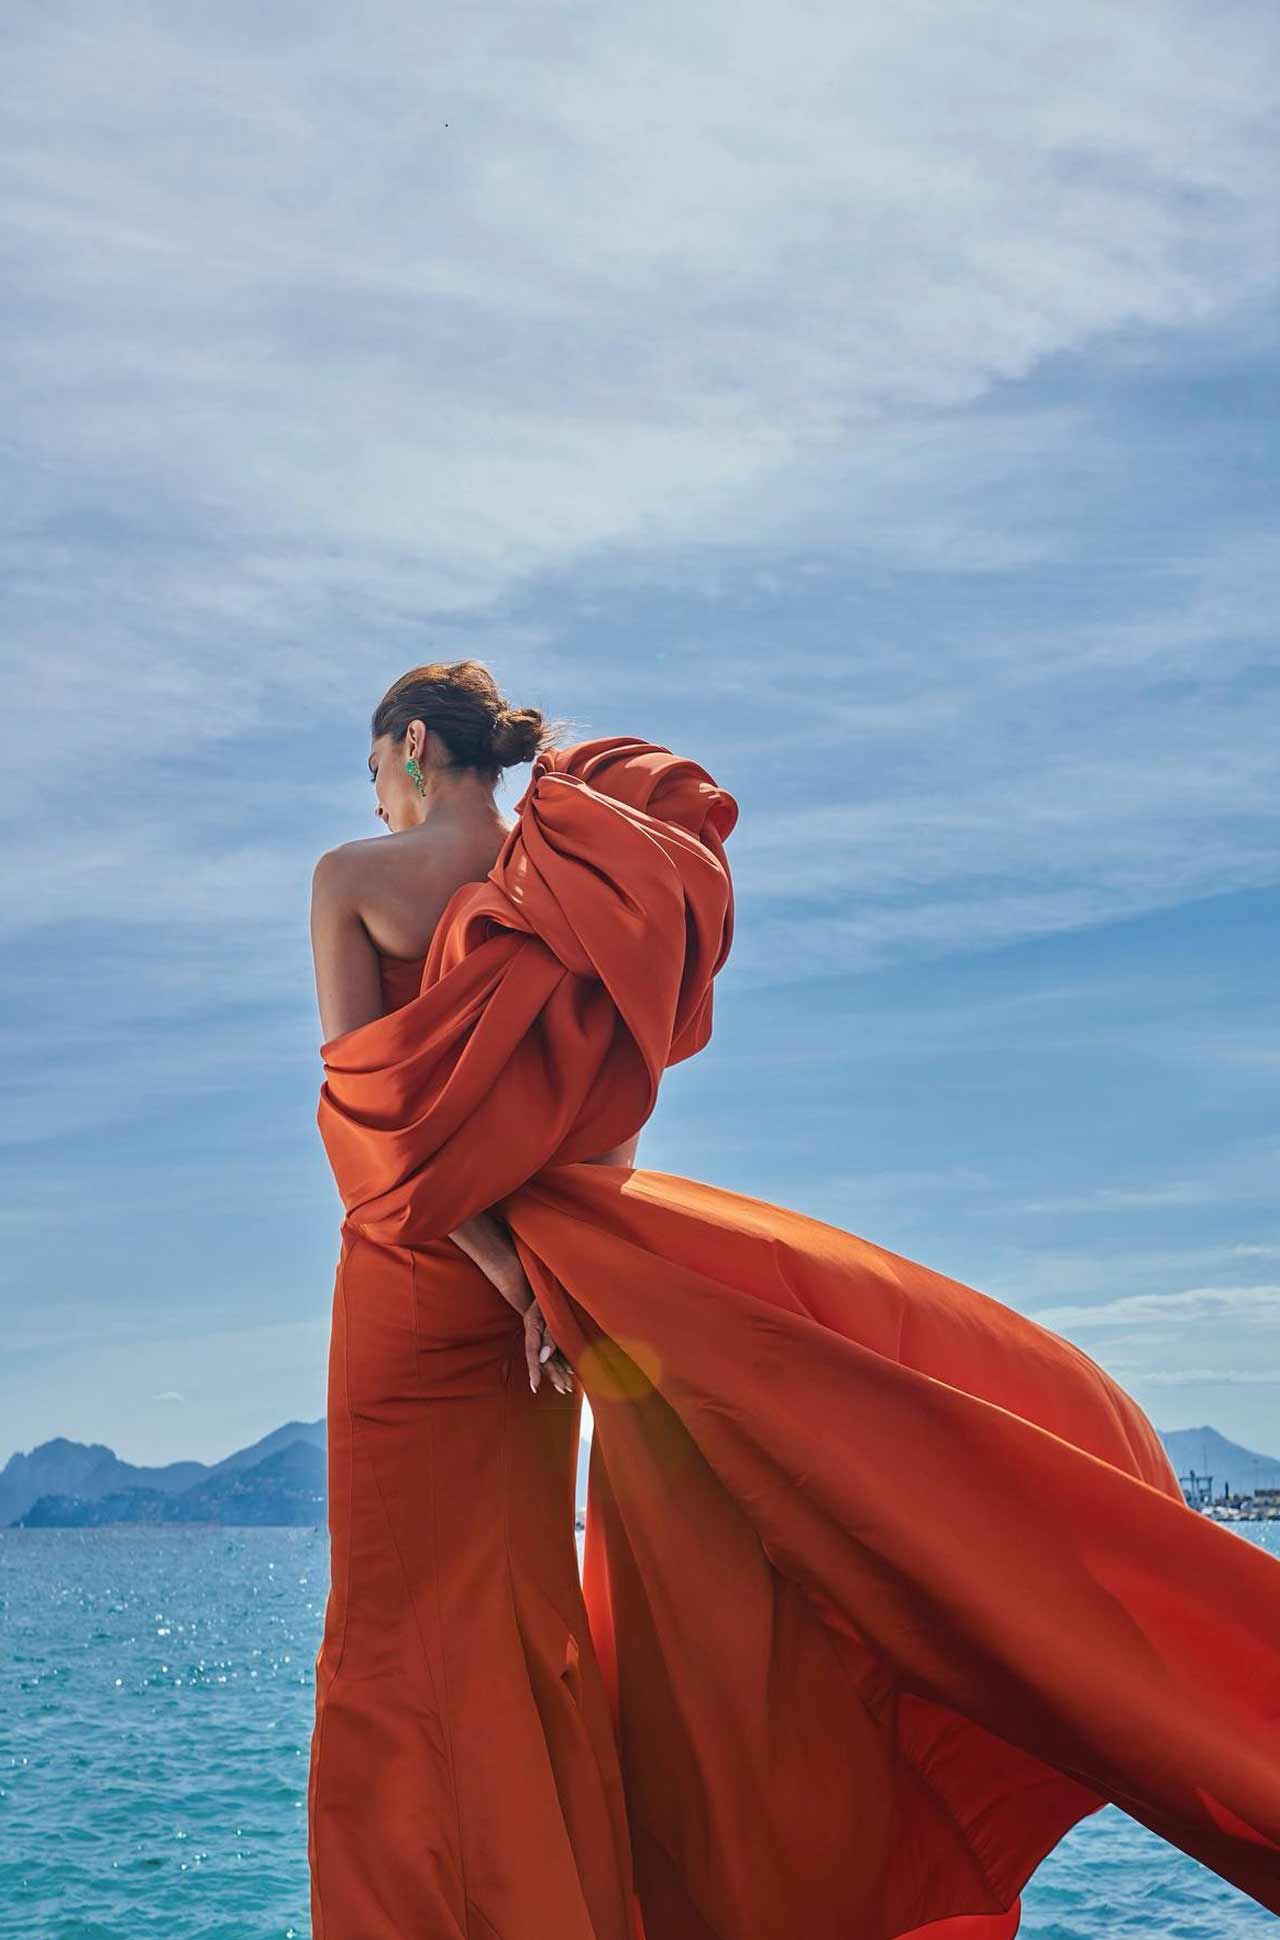 Deepika Padukone took to her Instagram handle and shared several pictures. She left netizens in awe of her yet again as she opted for a stunning orange gown dress.